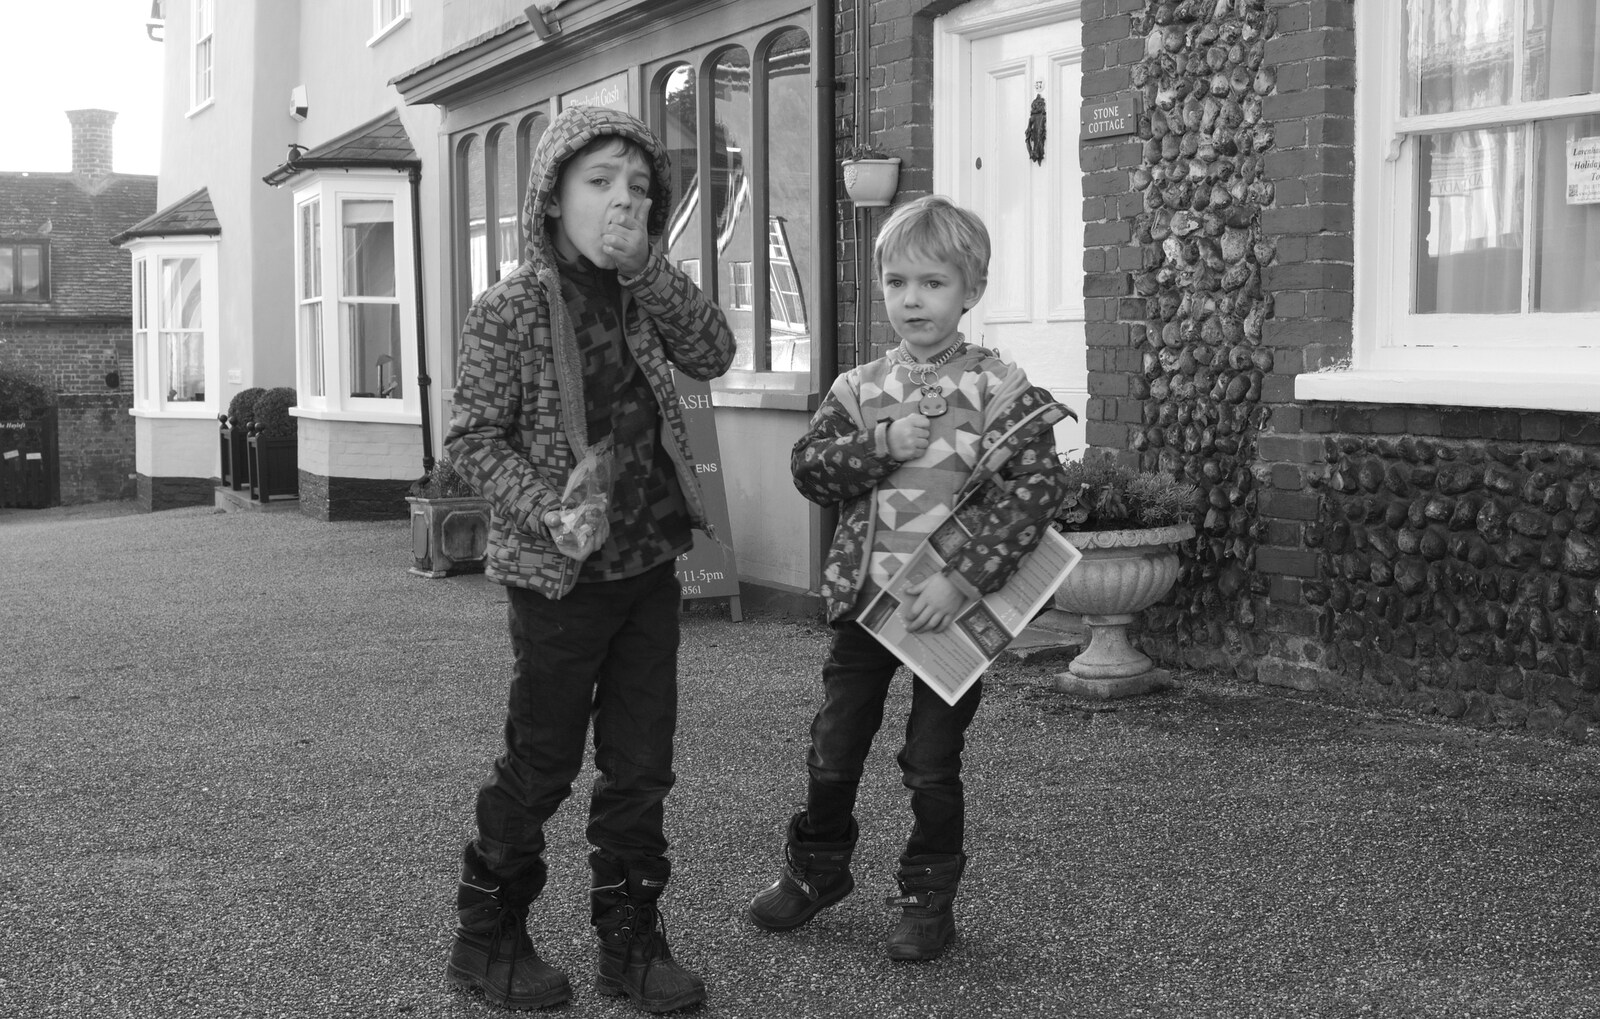 Fred and Harry scoff sweets from A Day in Lavenham, Suffolk - 22nd January 2017